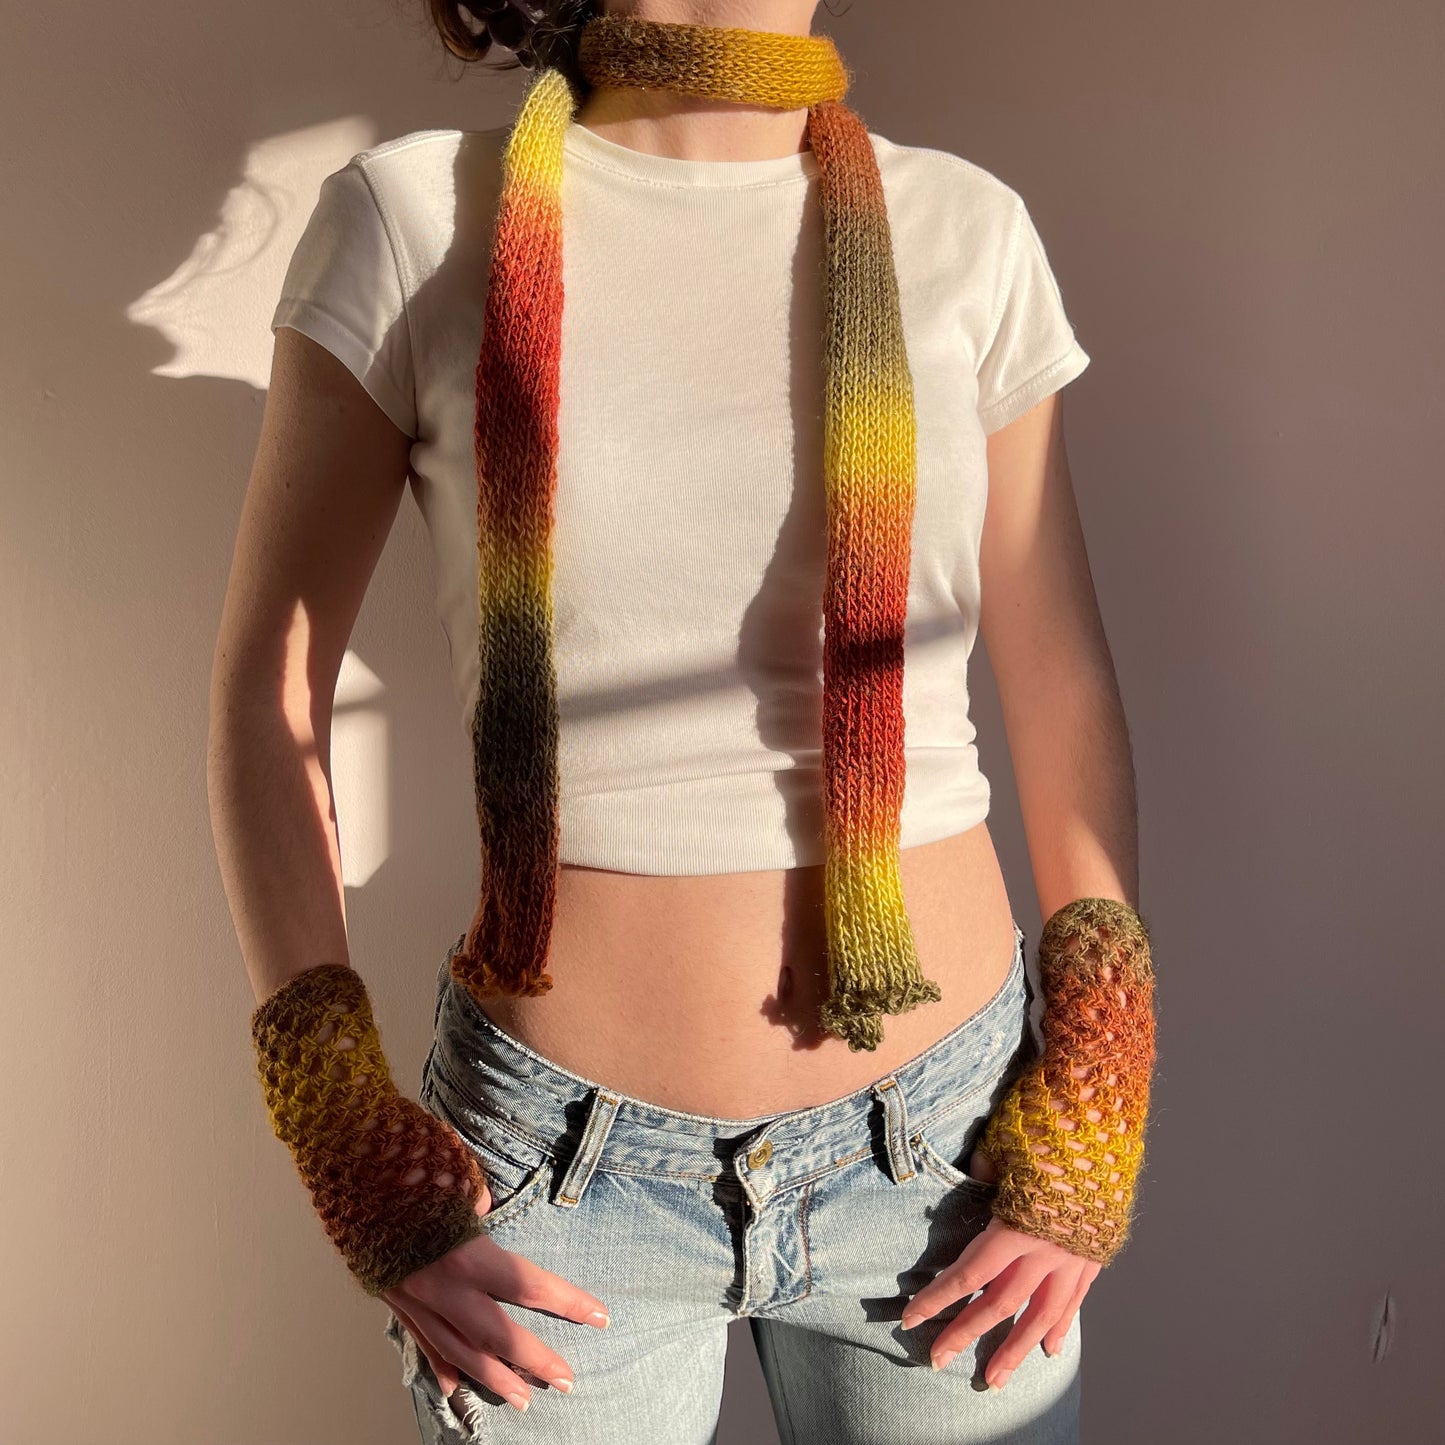 Handmade knitted ombré skinny scarf in earth tones